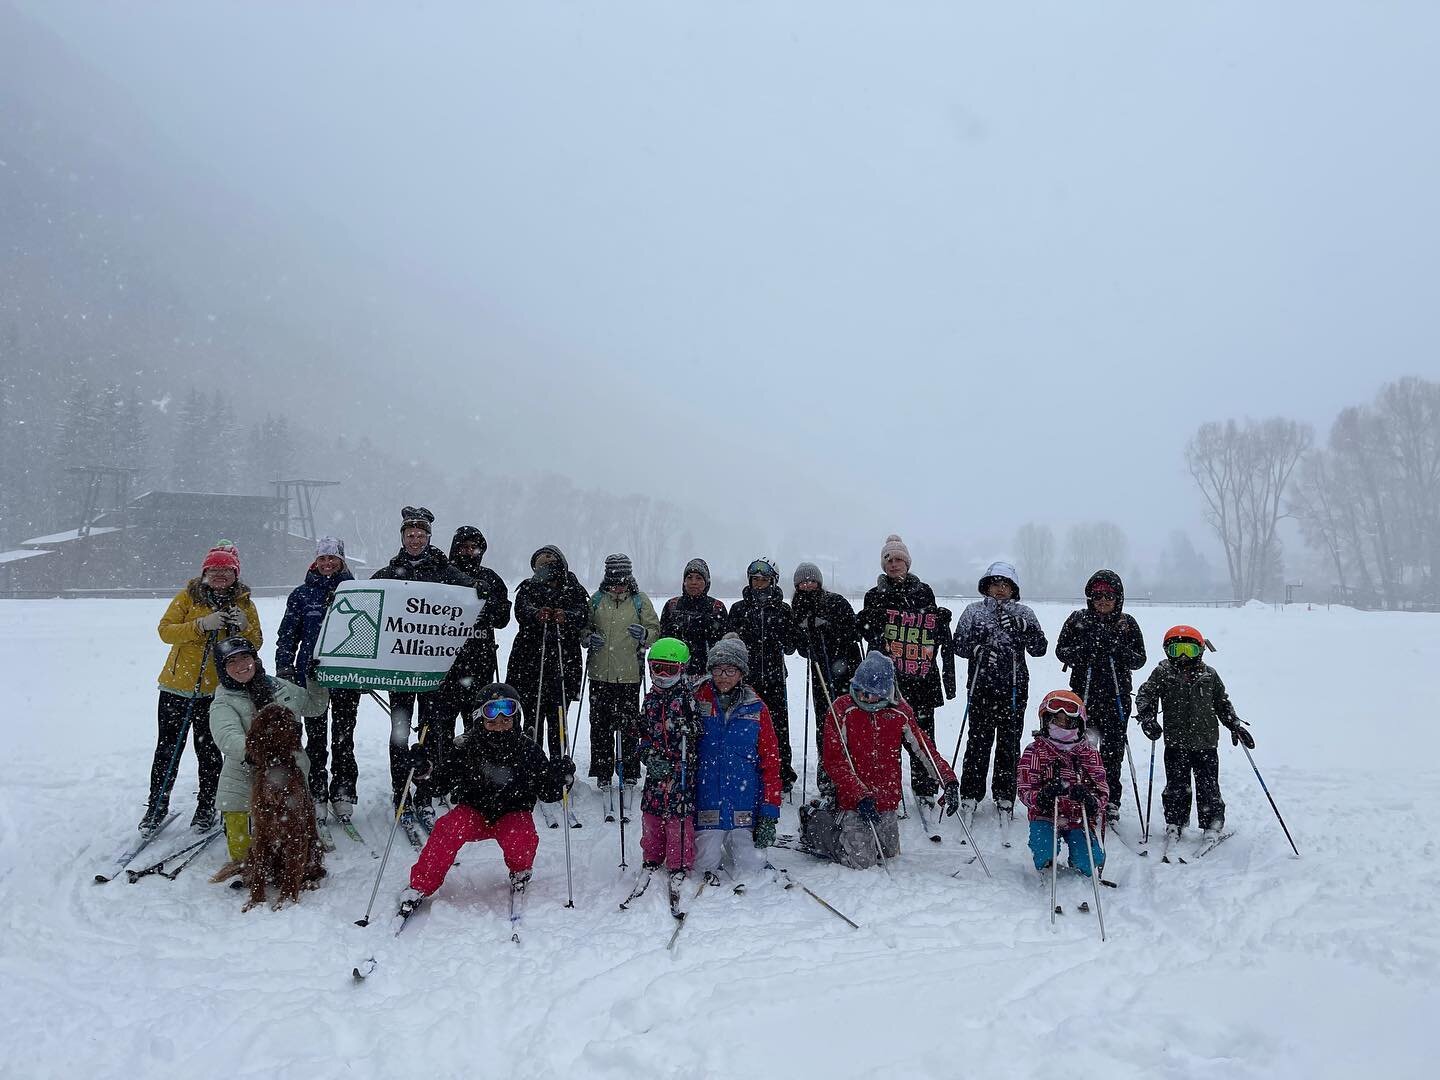 We had so much fun cross country skiing in the snow on Sunday. Thanks to everyone who attended, to @telluridelibrary and to @tchn_co and of course to Telluride Nordic Association for providing free rental equipment!

&hellip;
Nos divertimos mucho esq